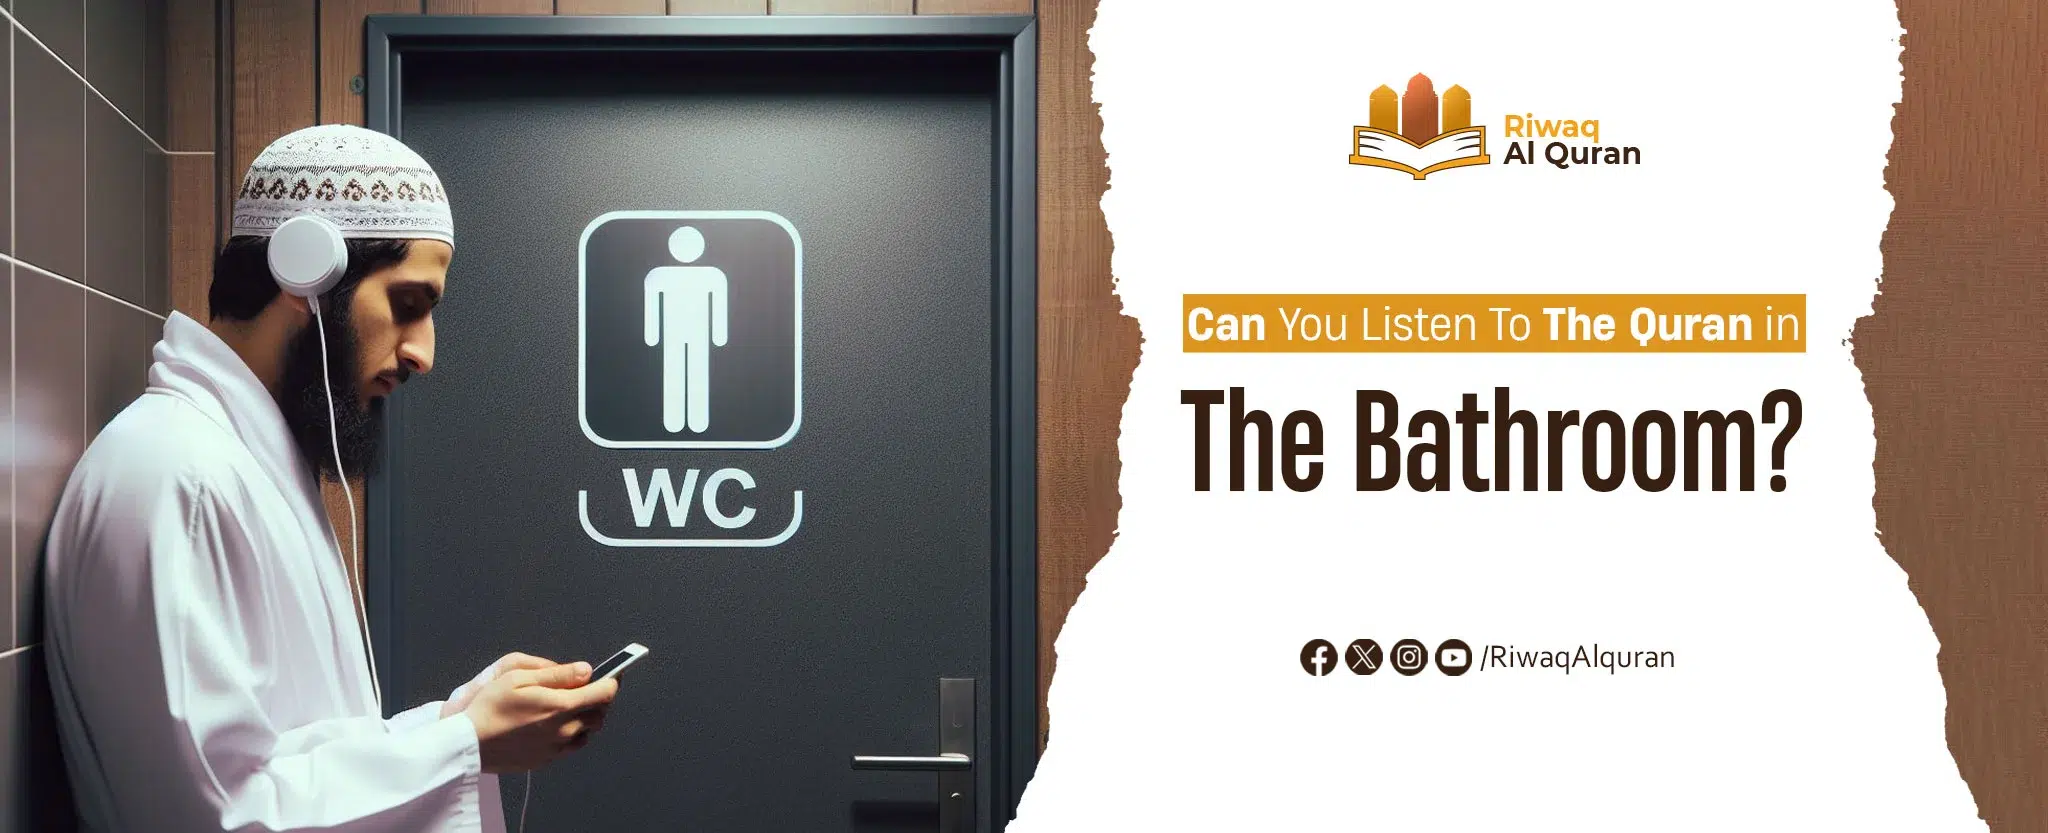 Can You Listen To The Quran In The Bathroom?